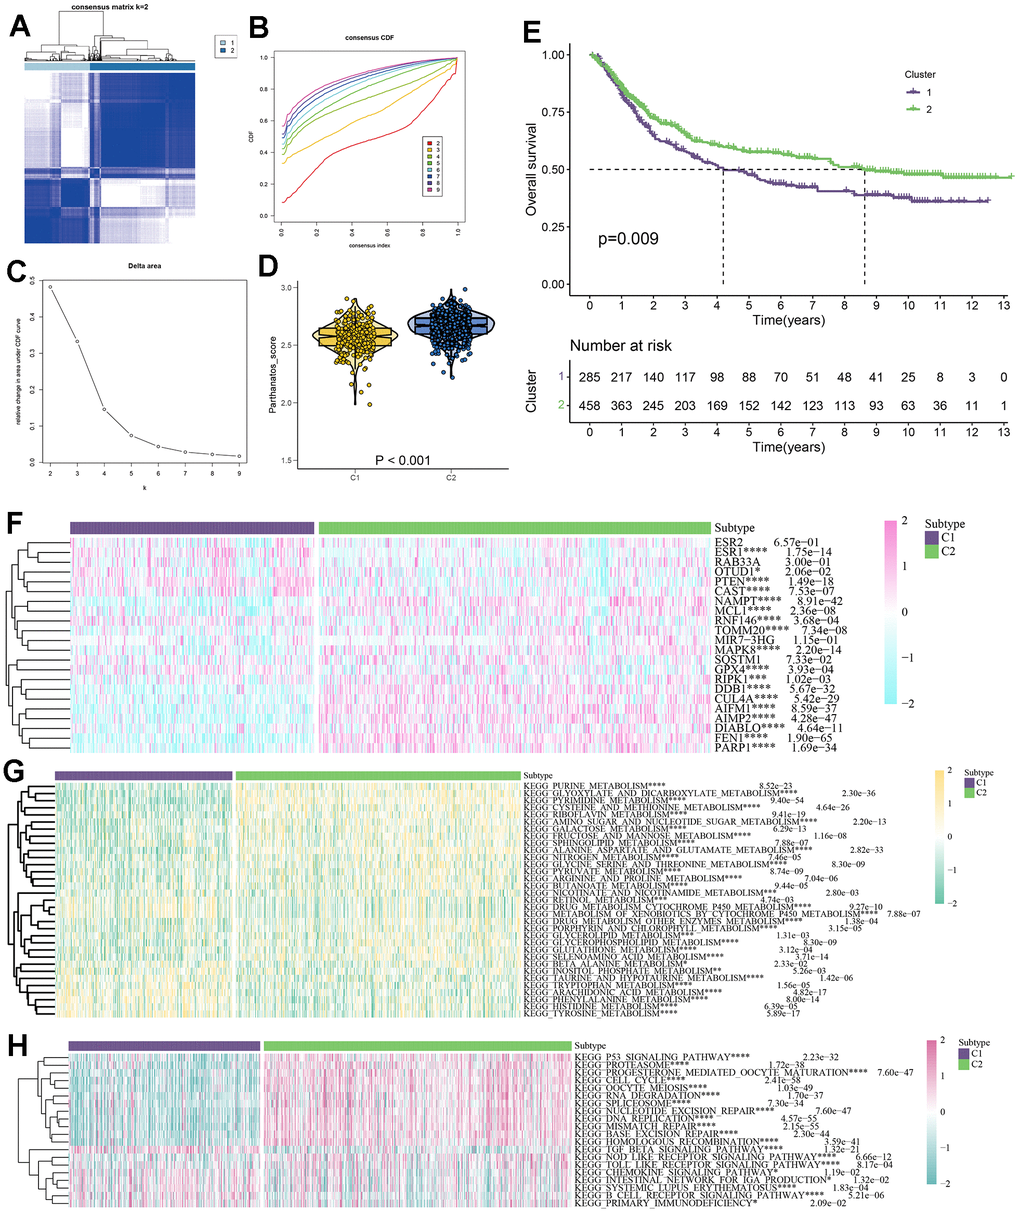 Parthanatos-based clustering analysis. (A) Define a consensus matrix heat map of k = 2 clusters and their associated regions. (B) Cumulative distribution function (CDF) curve under different cluster number. (C) The relative change in area under the CDF curve for different values of k. (D) The violin plot shows enrichment scores for two clusters (C1 and C2), pE) Survival curves of C1 and C2 clusters, purple for C1, green for C2. (F) Expression difference of parthanatos-related genes between CI and C2 subtypes. (G) Differences in the activity of metabolic pathways between CI and C2 subtypes. (H) Differences in immune pathway activity between CI and C2 subtypes.